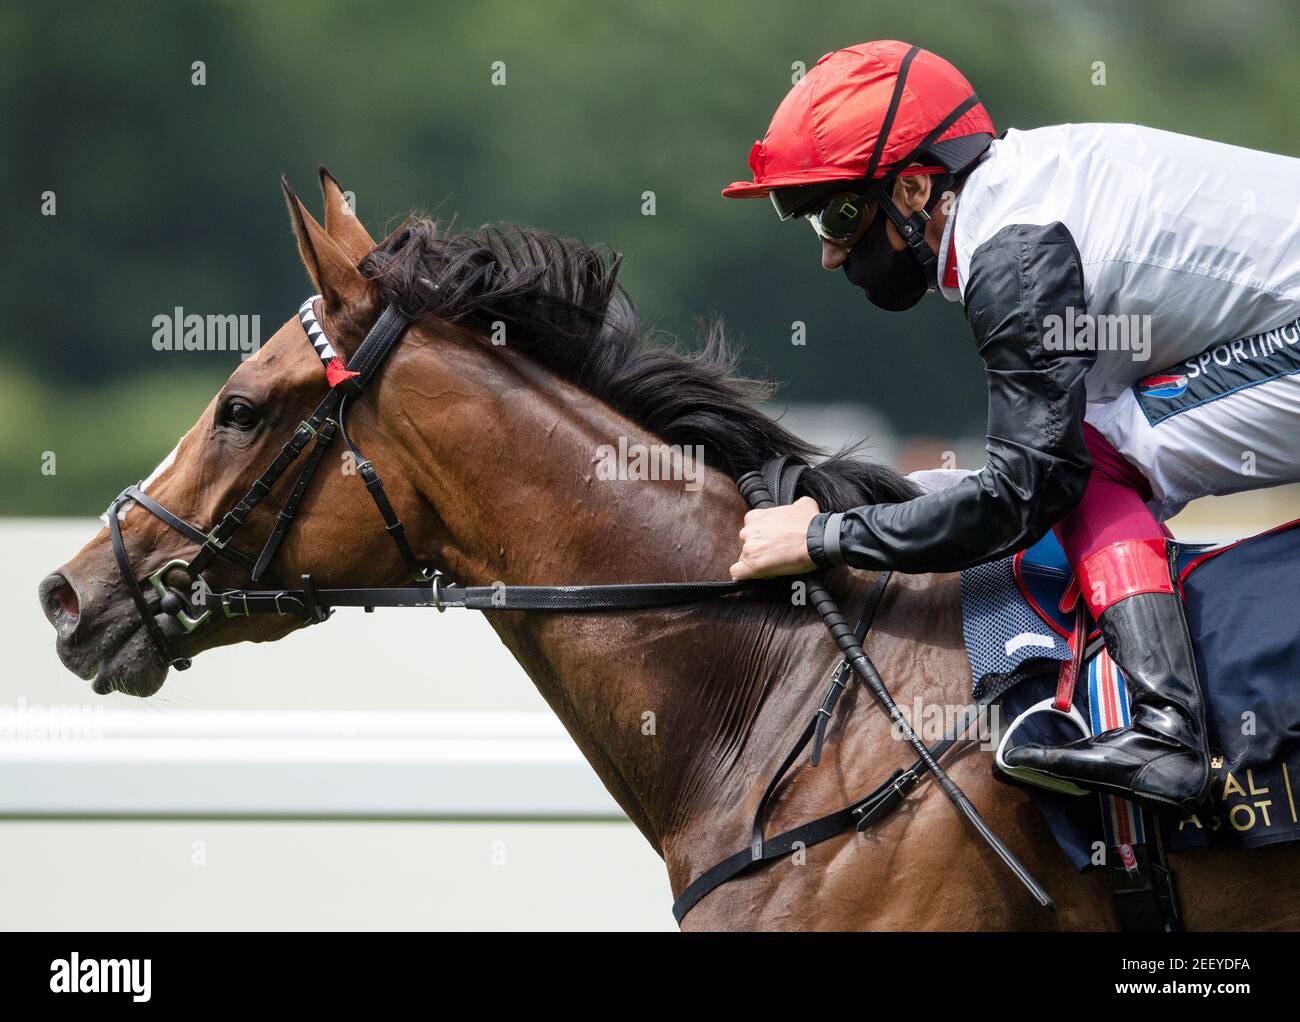 Horse Racing - Royal Ascot - Ascot Racecourse, Ascot, Britain - June 16, 2020 Frankly Darling ridden by Frankie Dettori wins the Ribblesdale Stakes, as racing resumes behind closed doors after the outbreak of the coronavirus disease (COVID-19) Edward Whitaker/Pool via Reuters Stock Photo